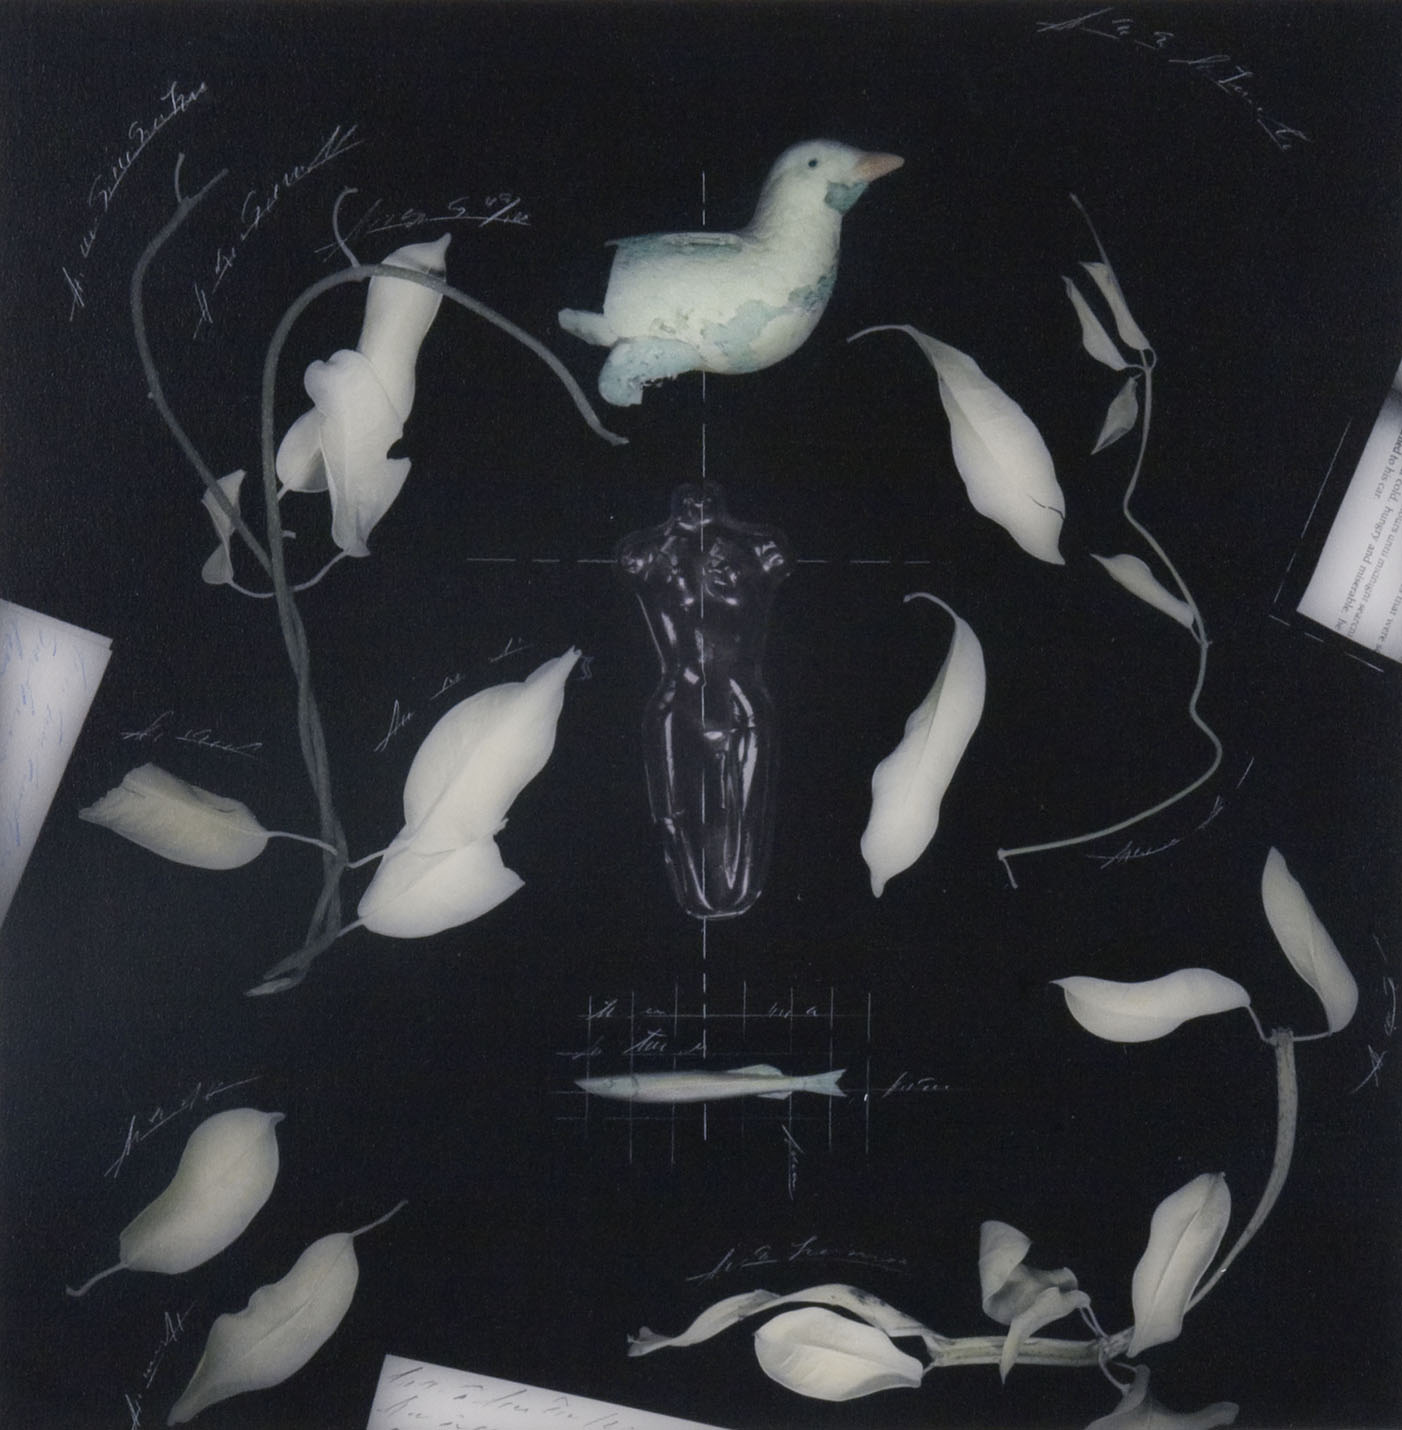 "Chart of Brief Forms #22", 1991